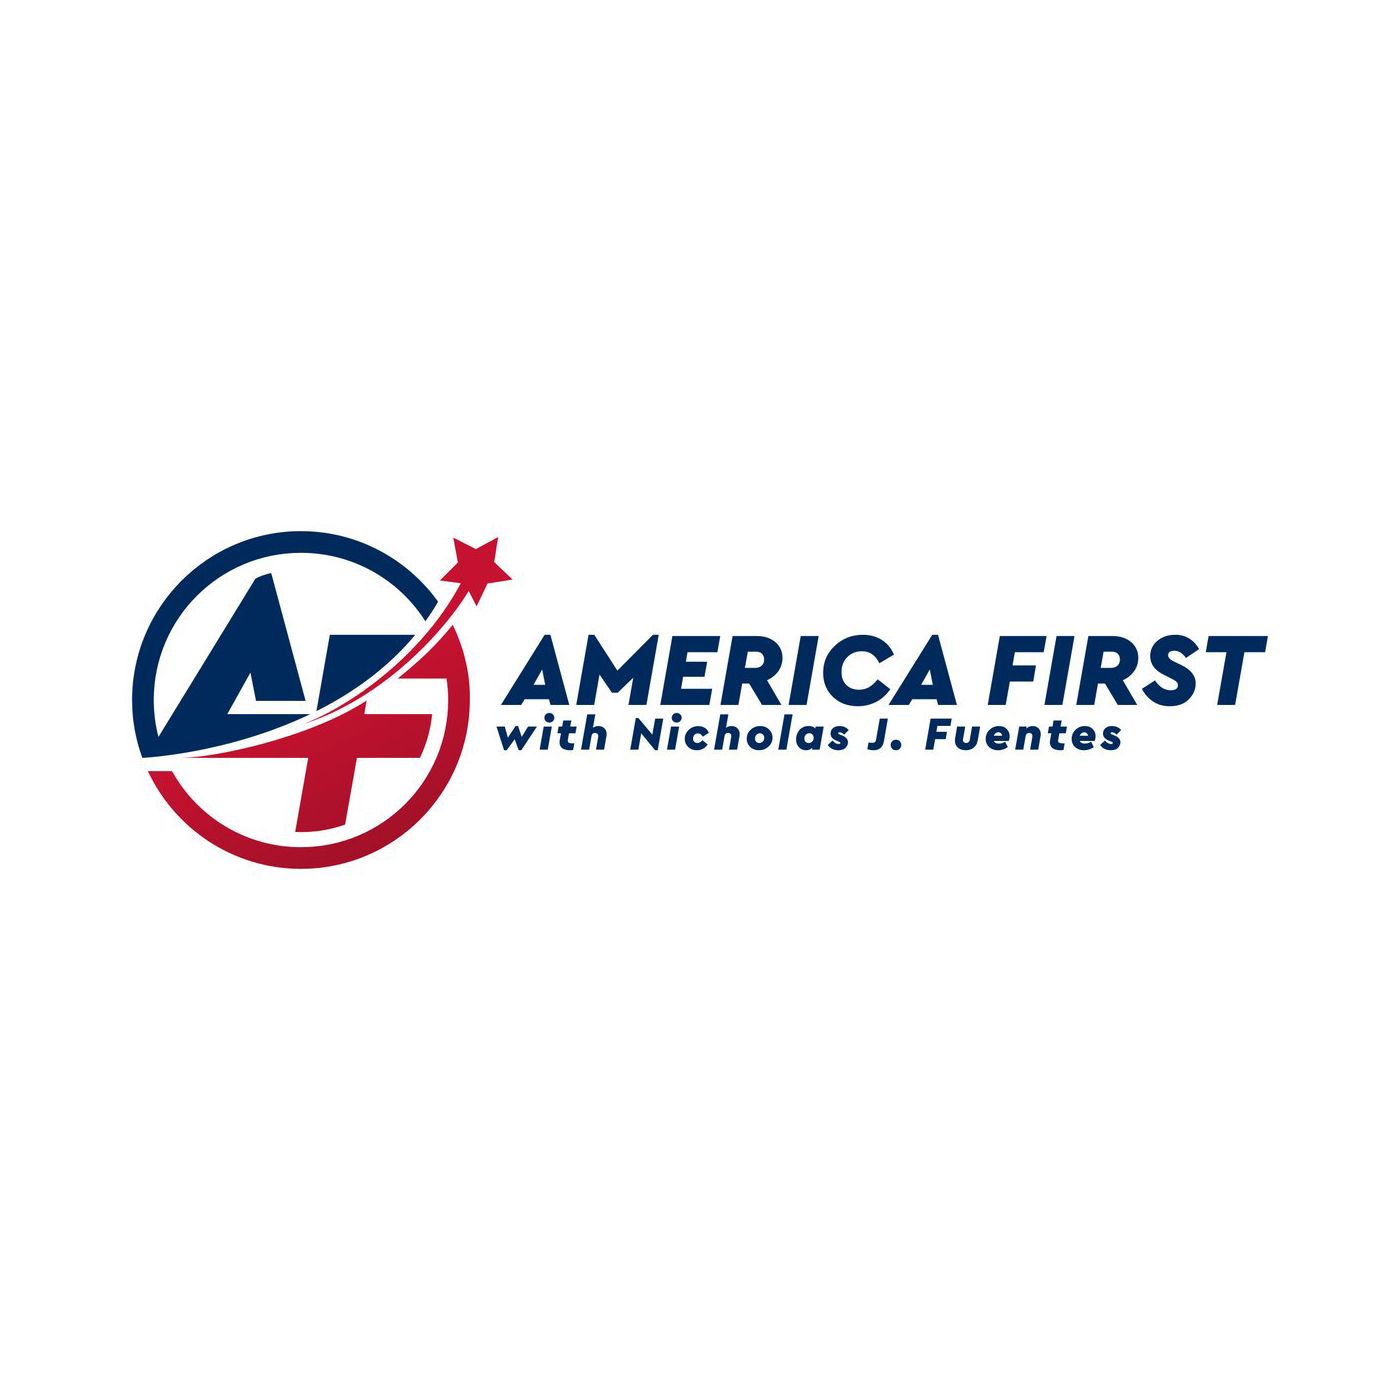 America First with Nicholas J. Fuentes